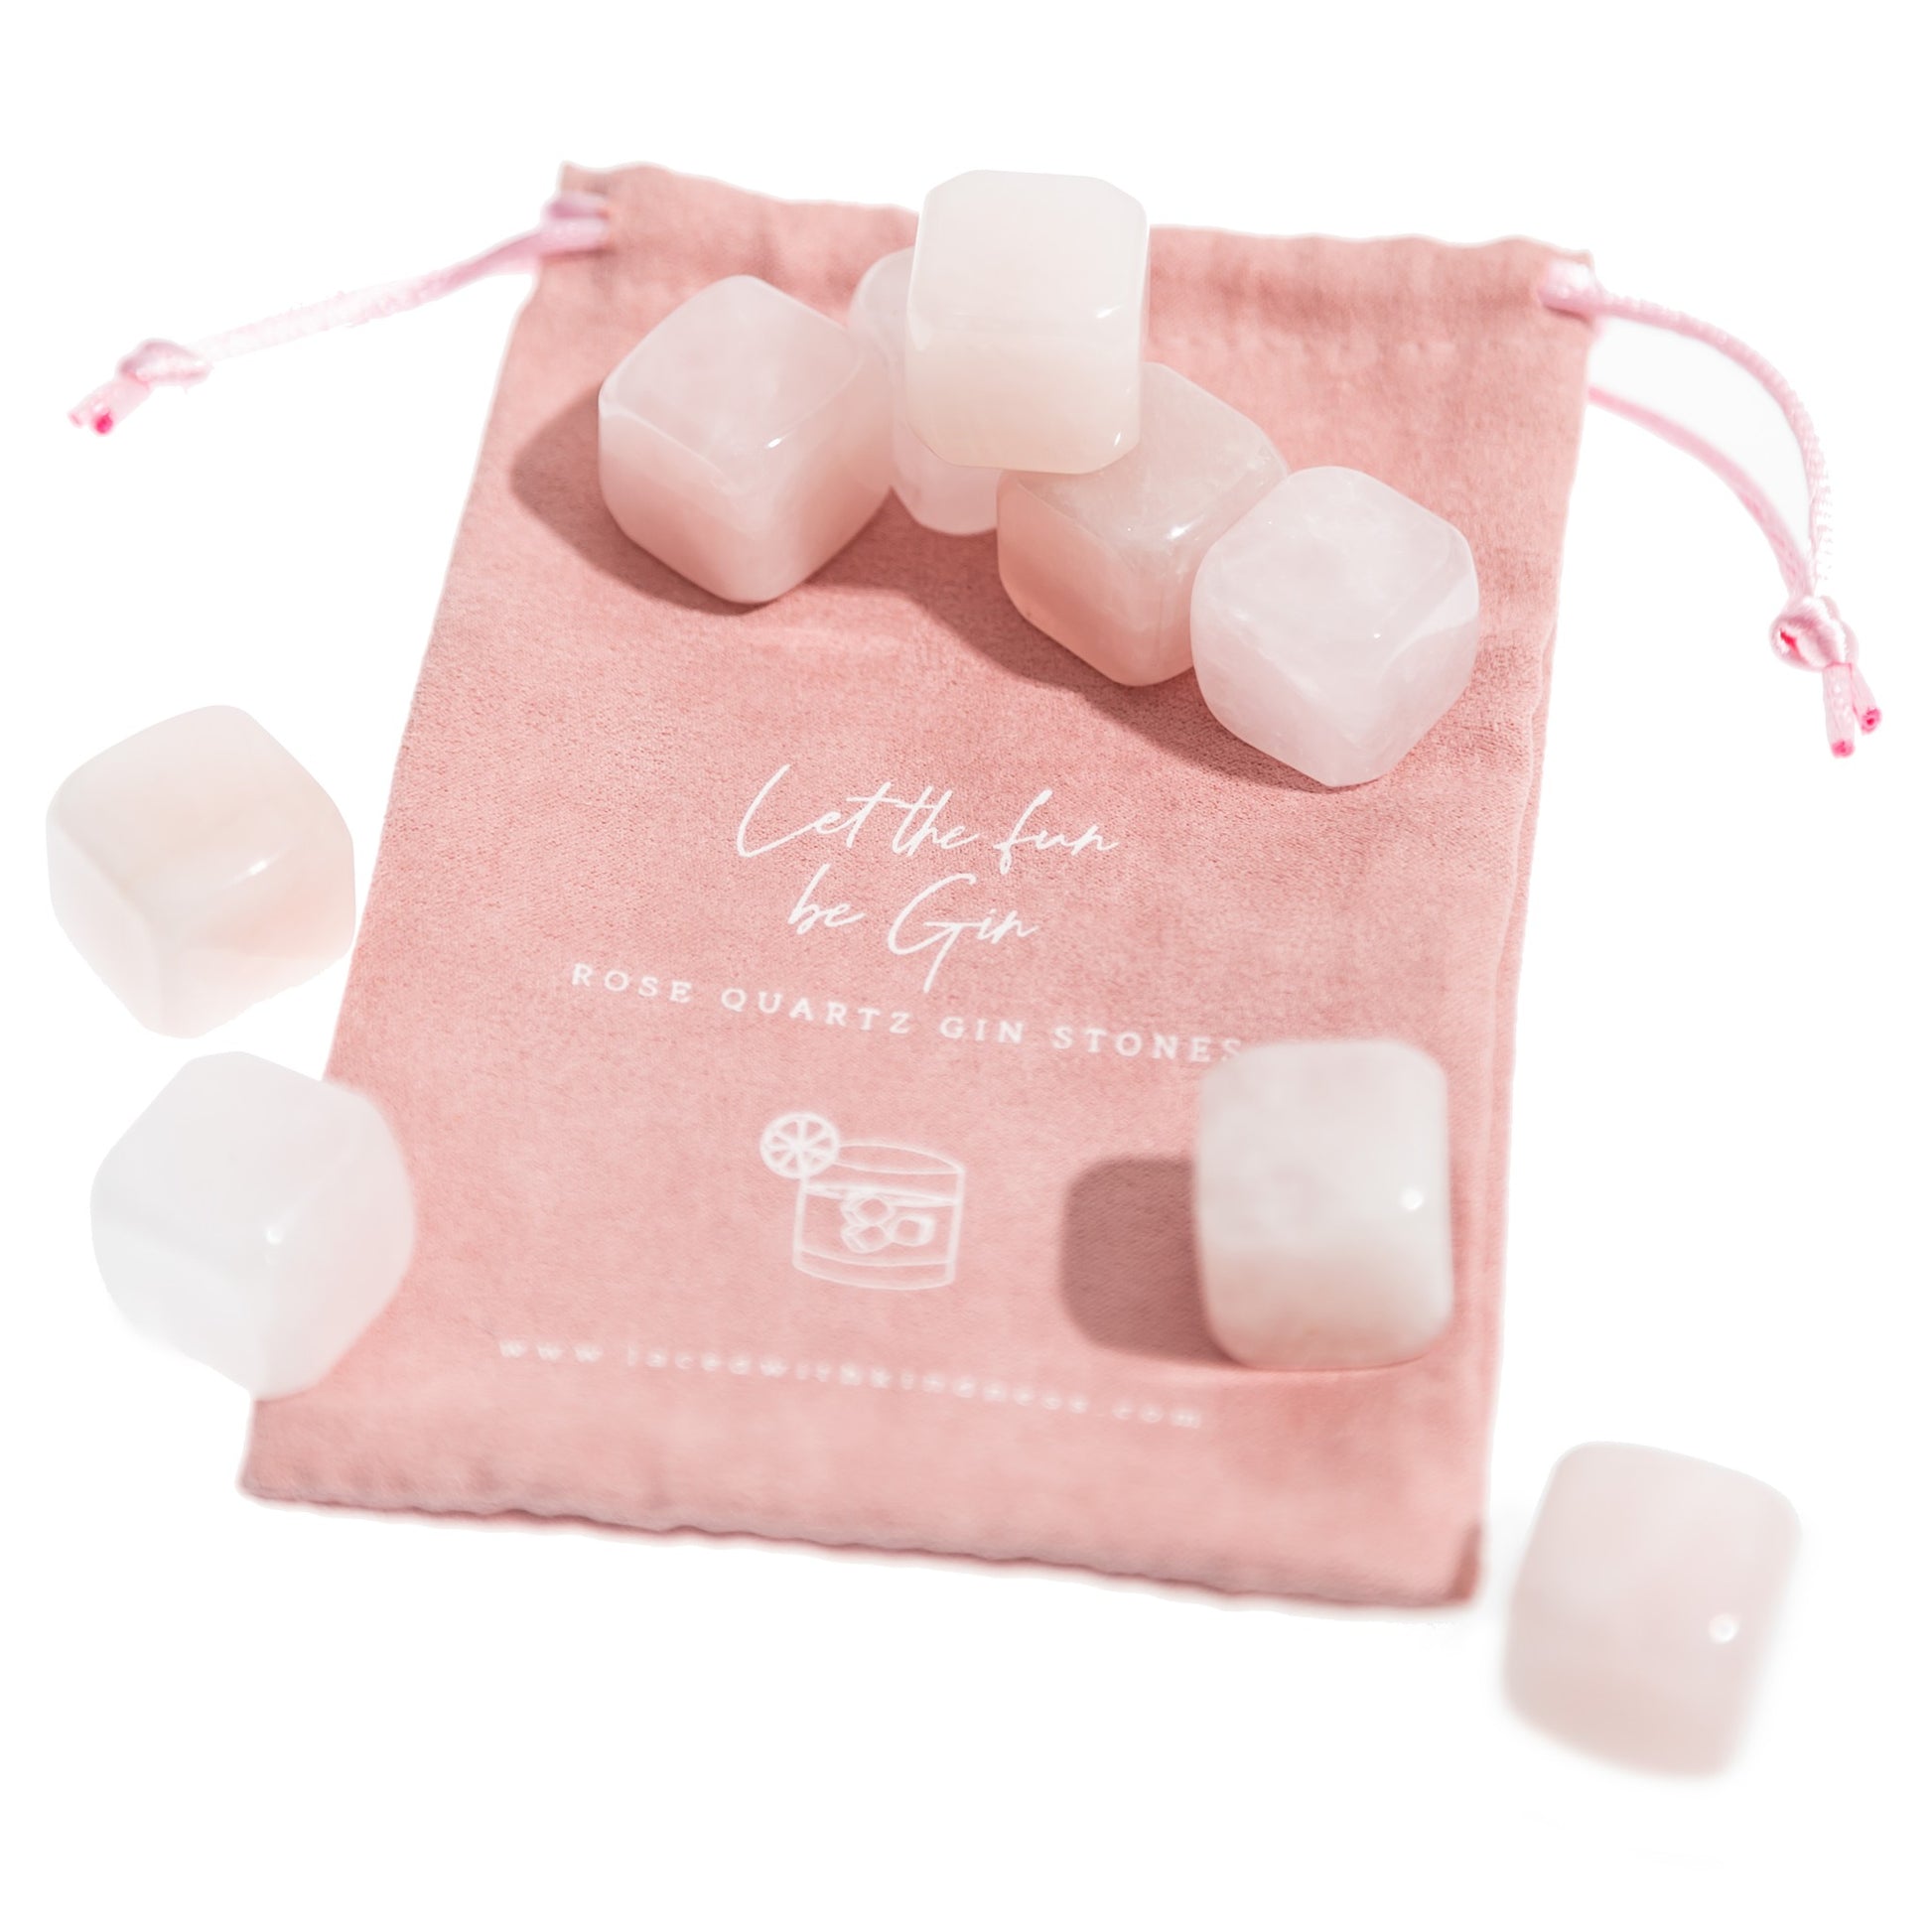 9 pieces Rose Quartz Gin Stones with pouch